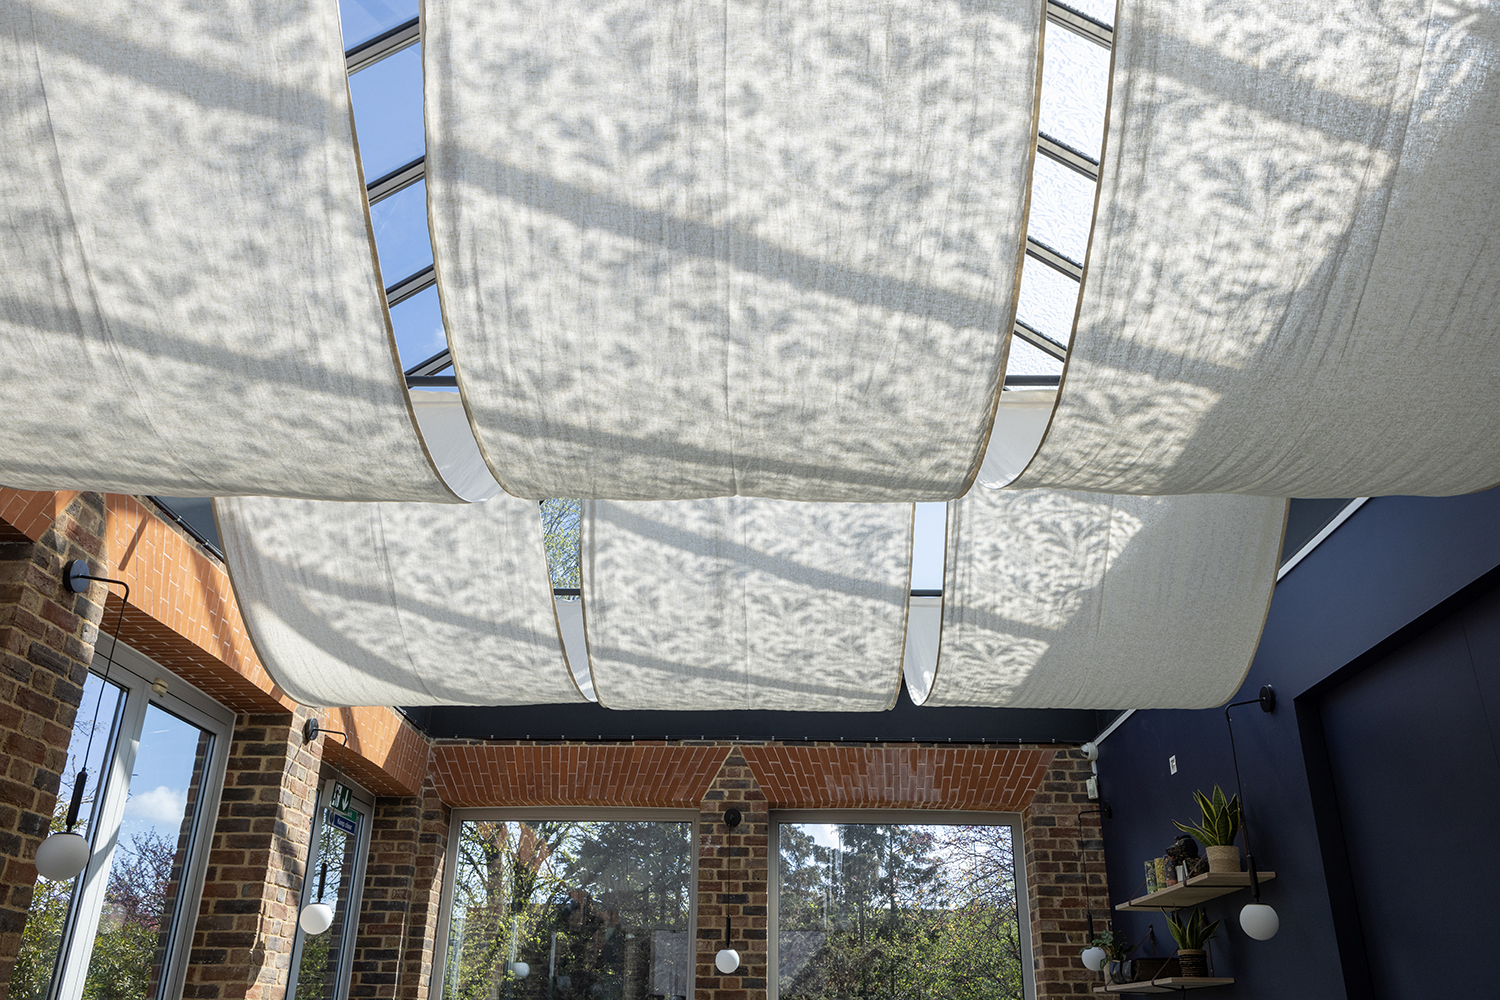 Image of the roof of William Morris Gallery's Cafe. Sun is shining through the roof into the Cafe below.